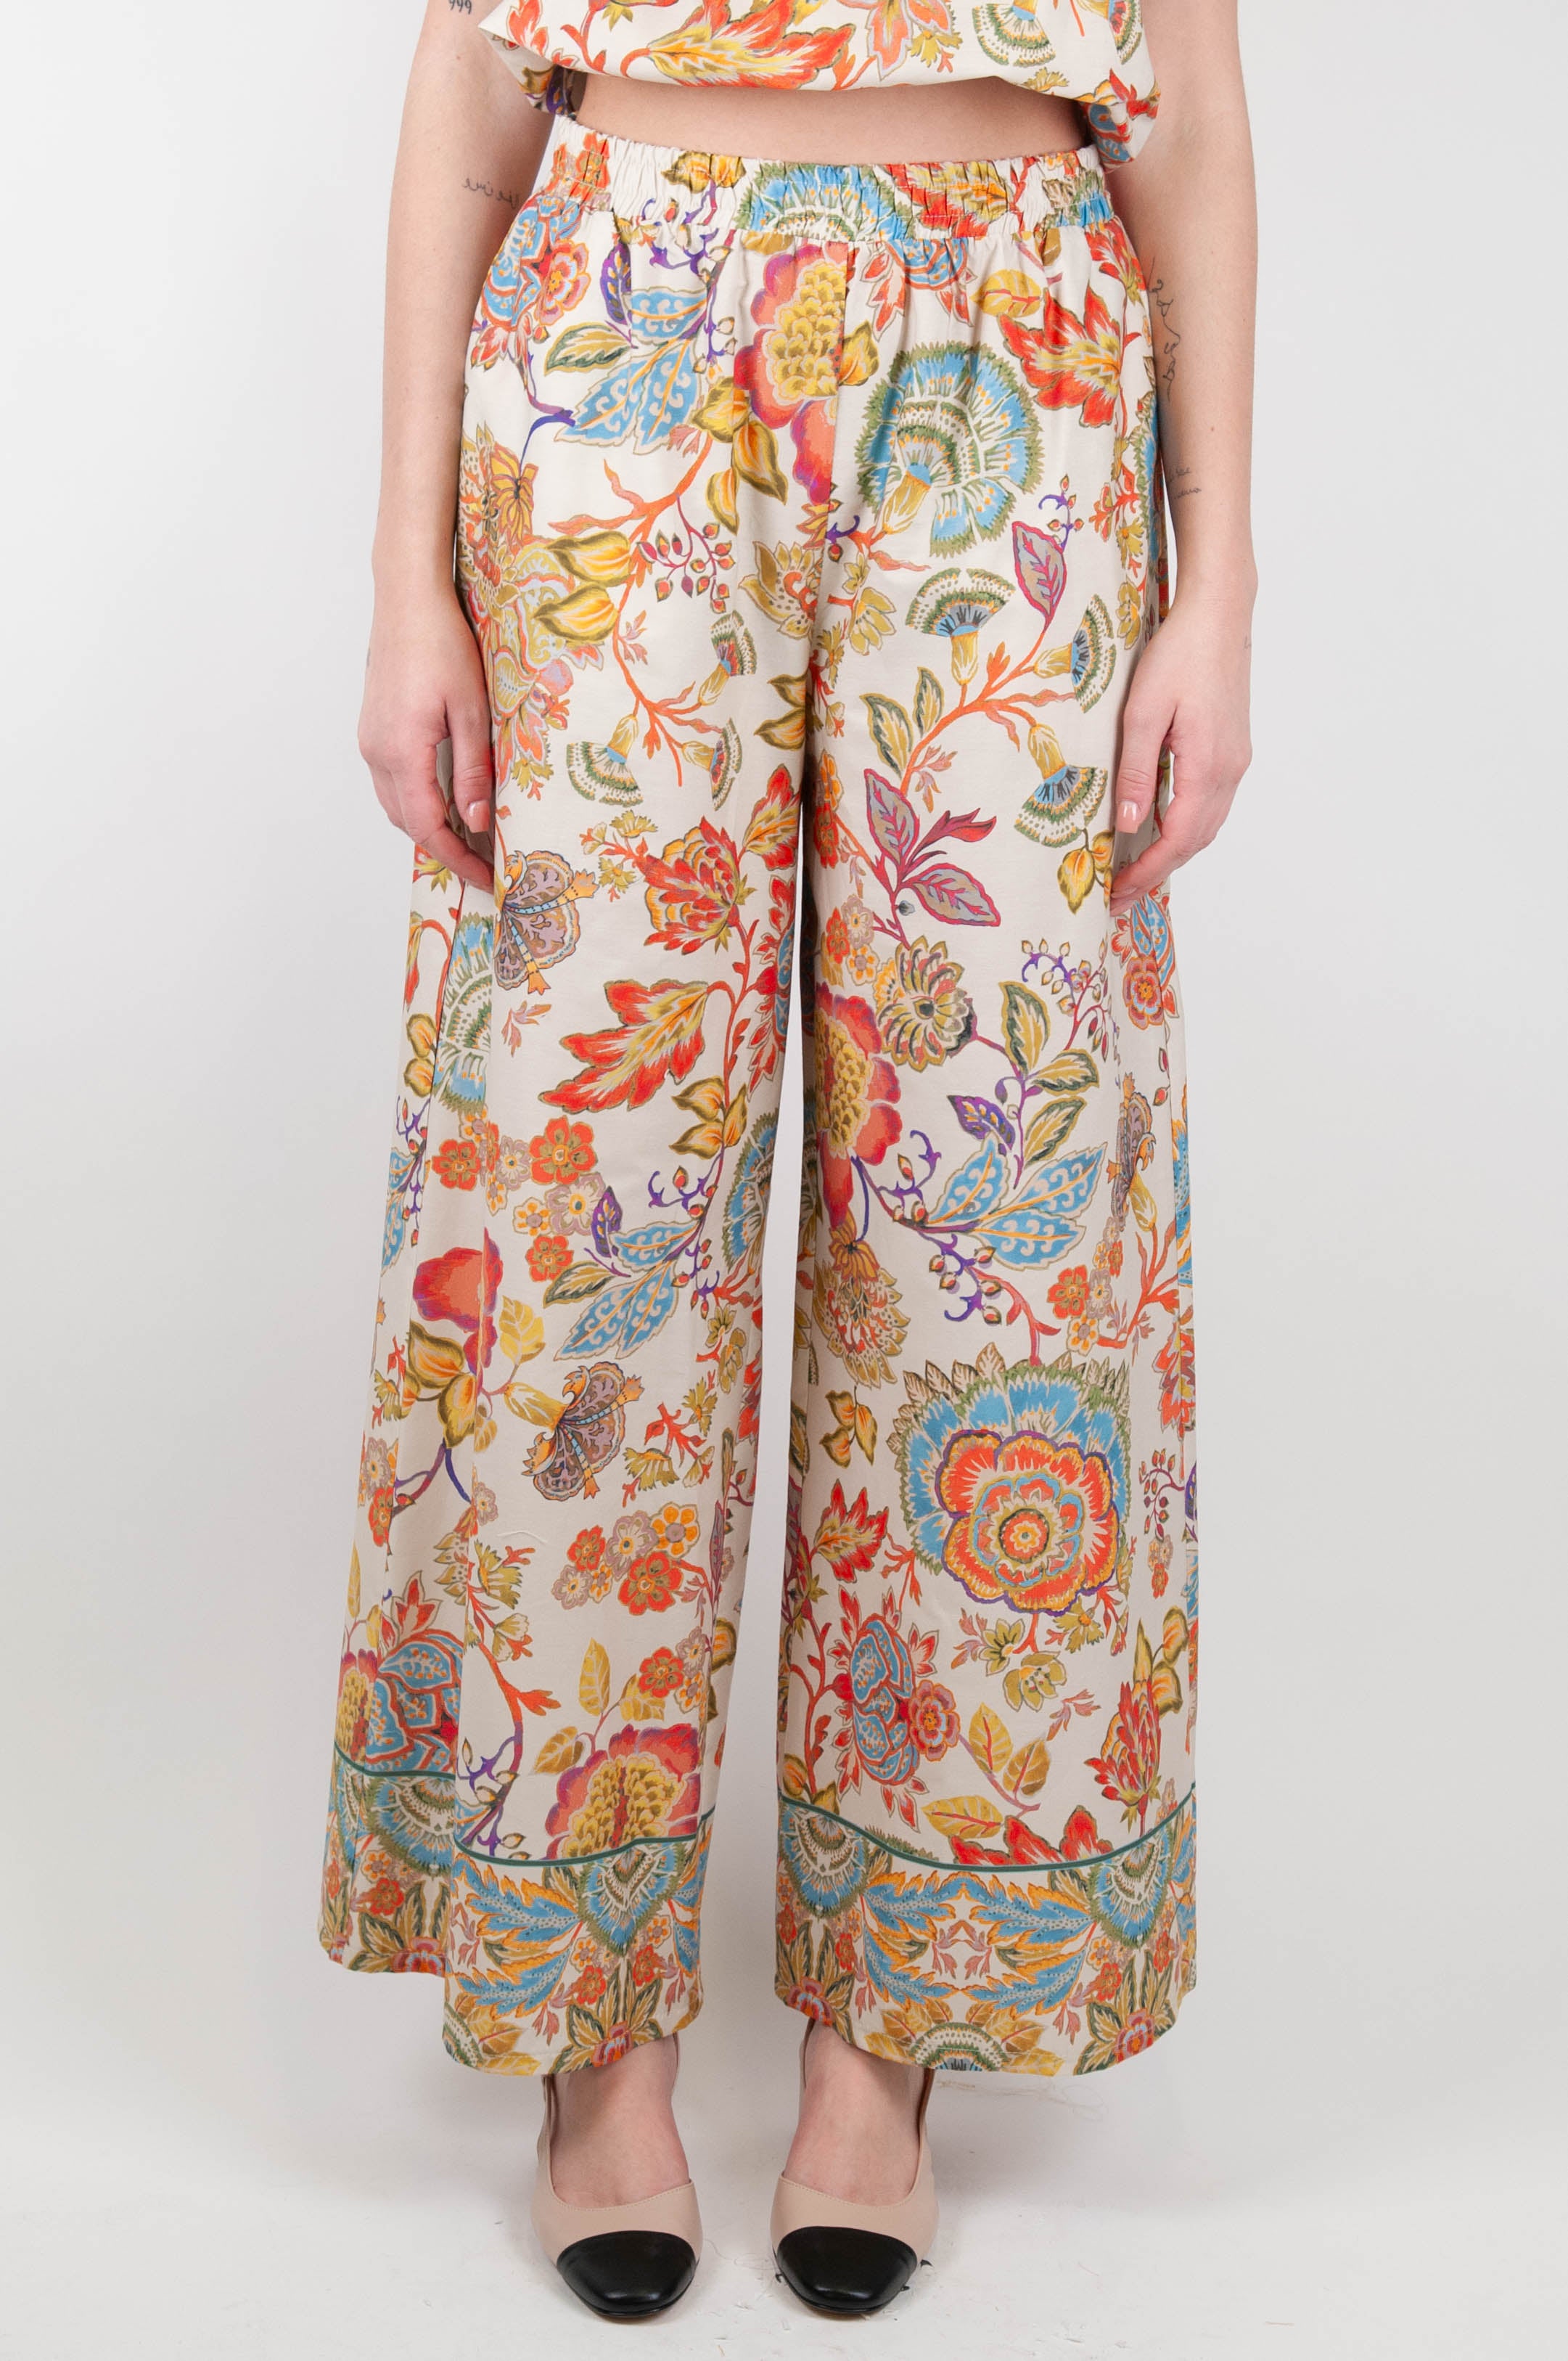 Tension in - Floral patterned palazzo trousers with elasticated waist